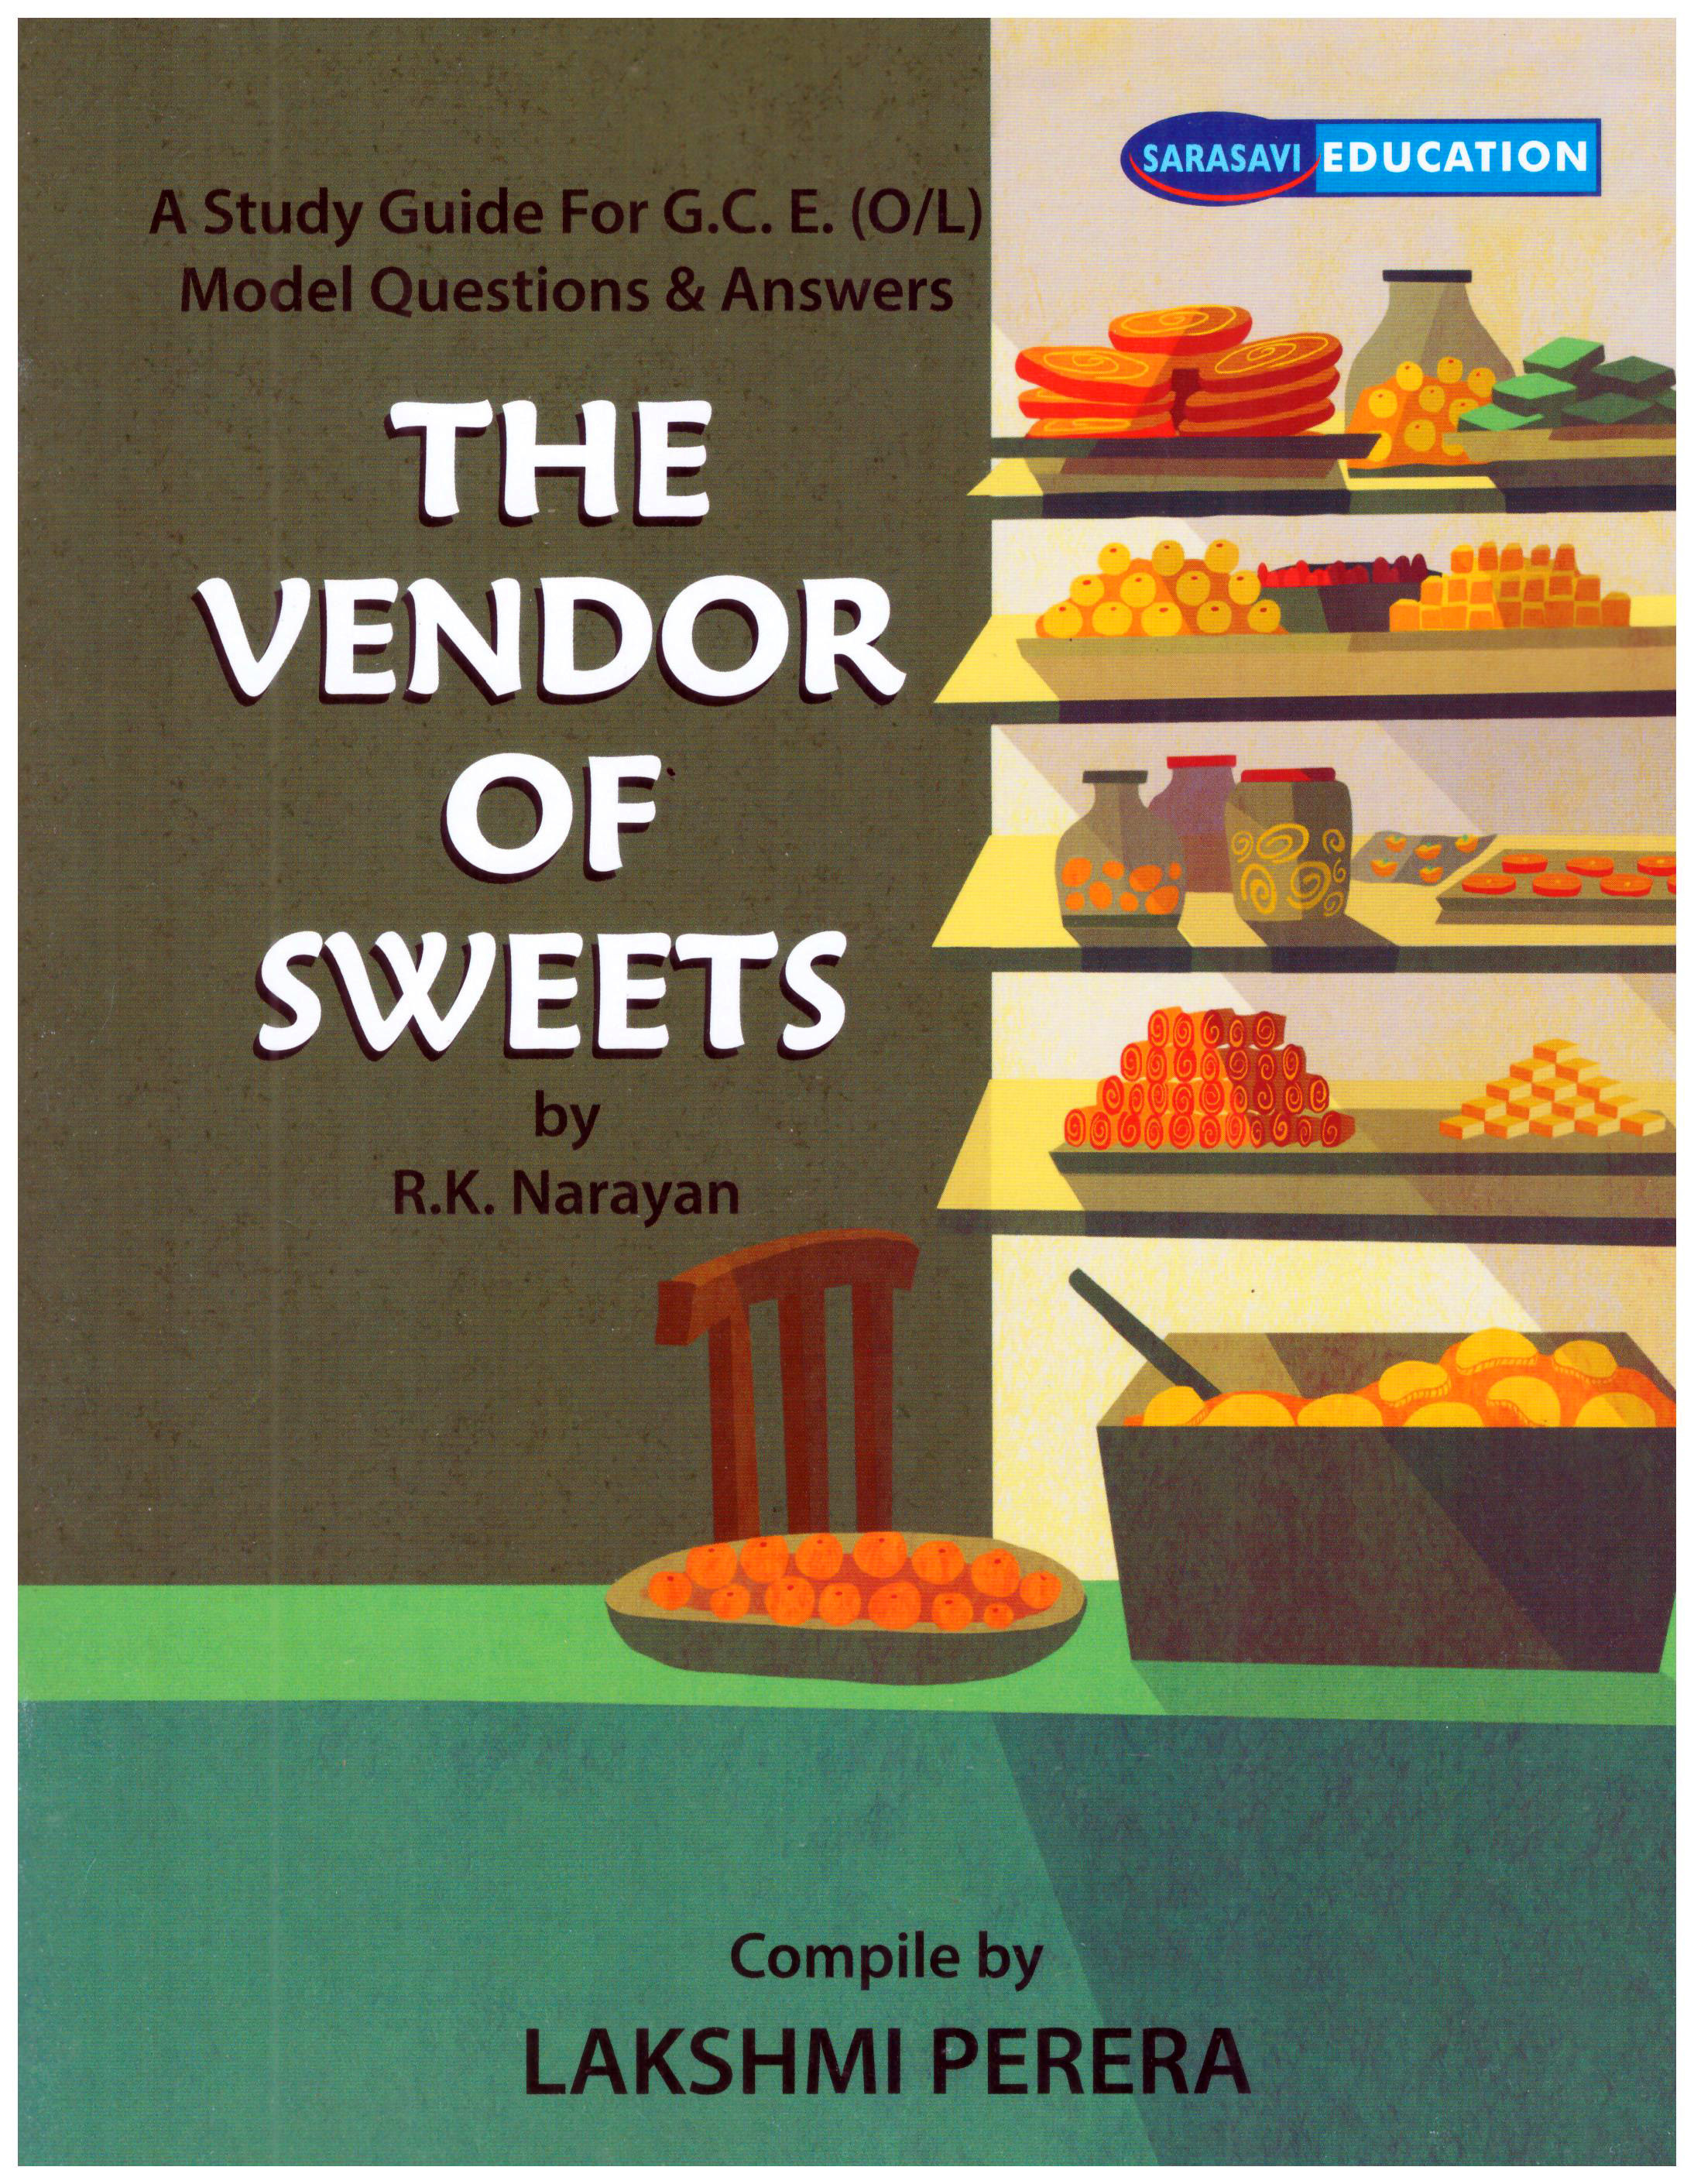 A Study Guide For G.C.E ( O/L) Model Questions & Ansuwers The Vendor of Sweets